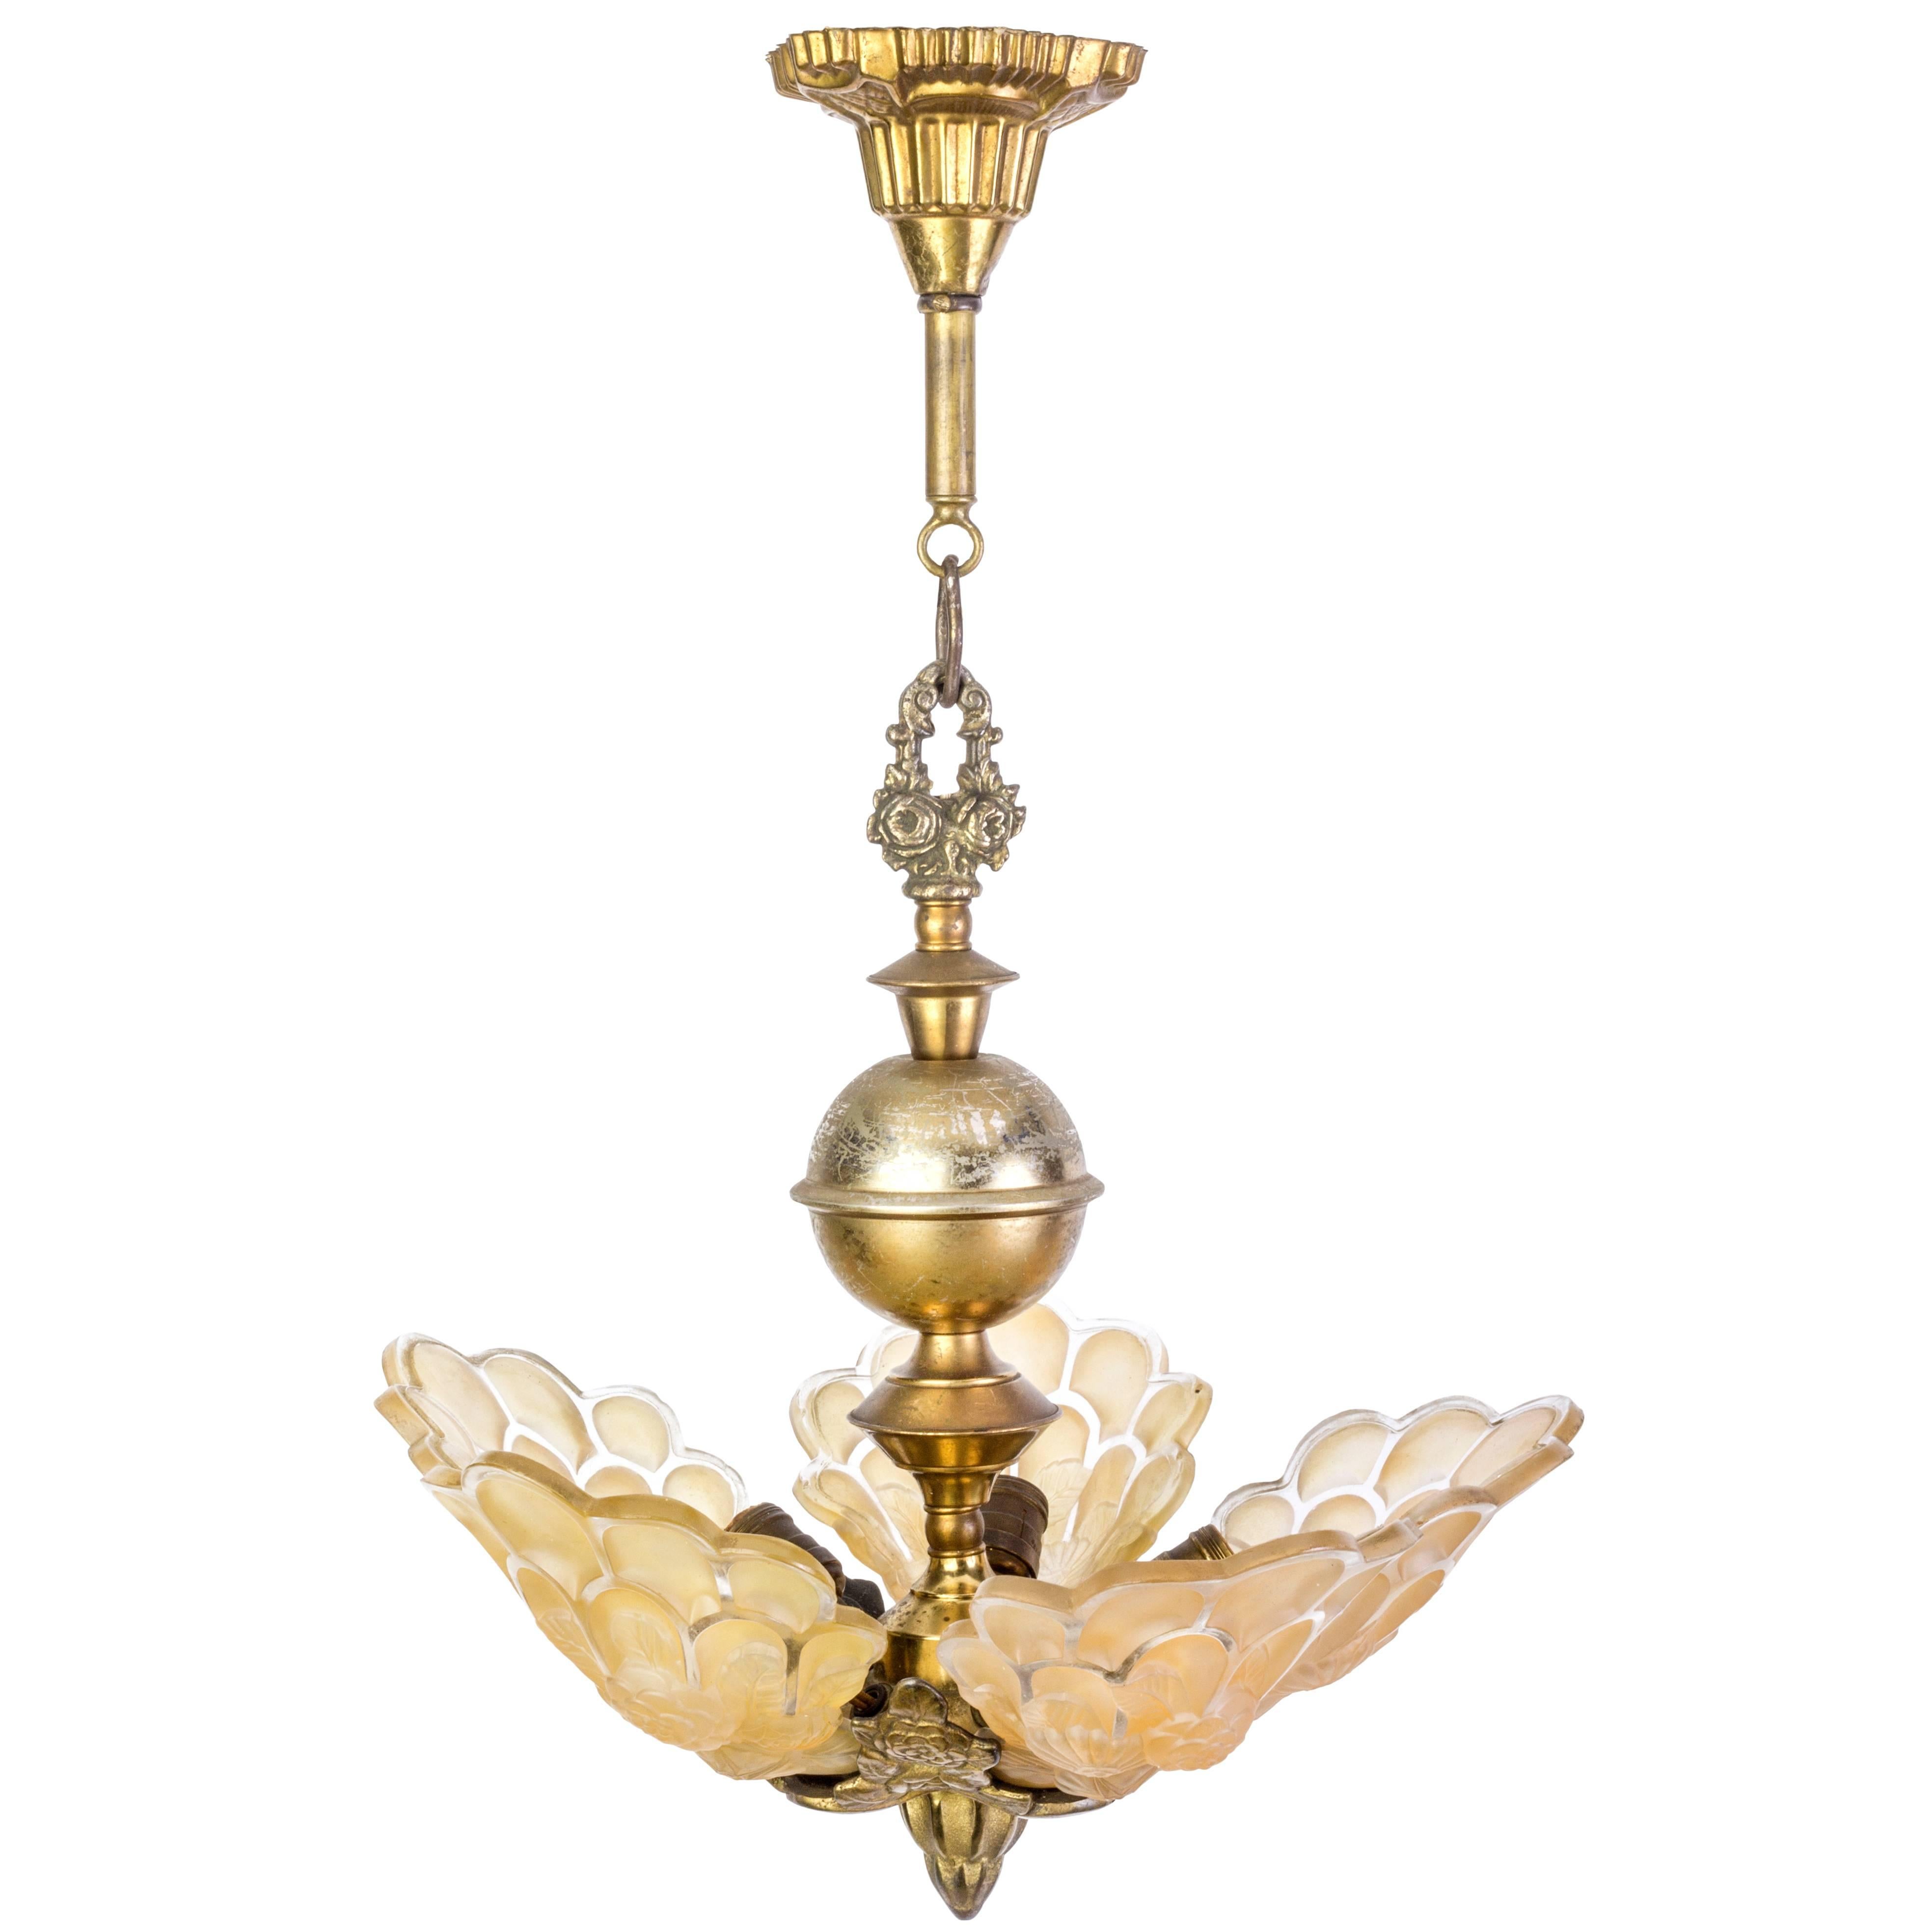 Exquisite Art Deco Chandelier with Peacock Shaped Glass Shades